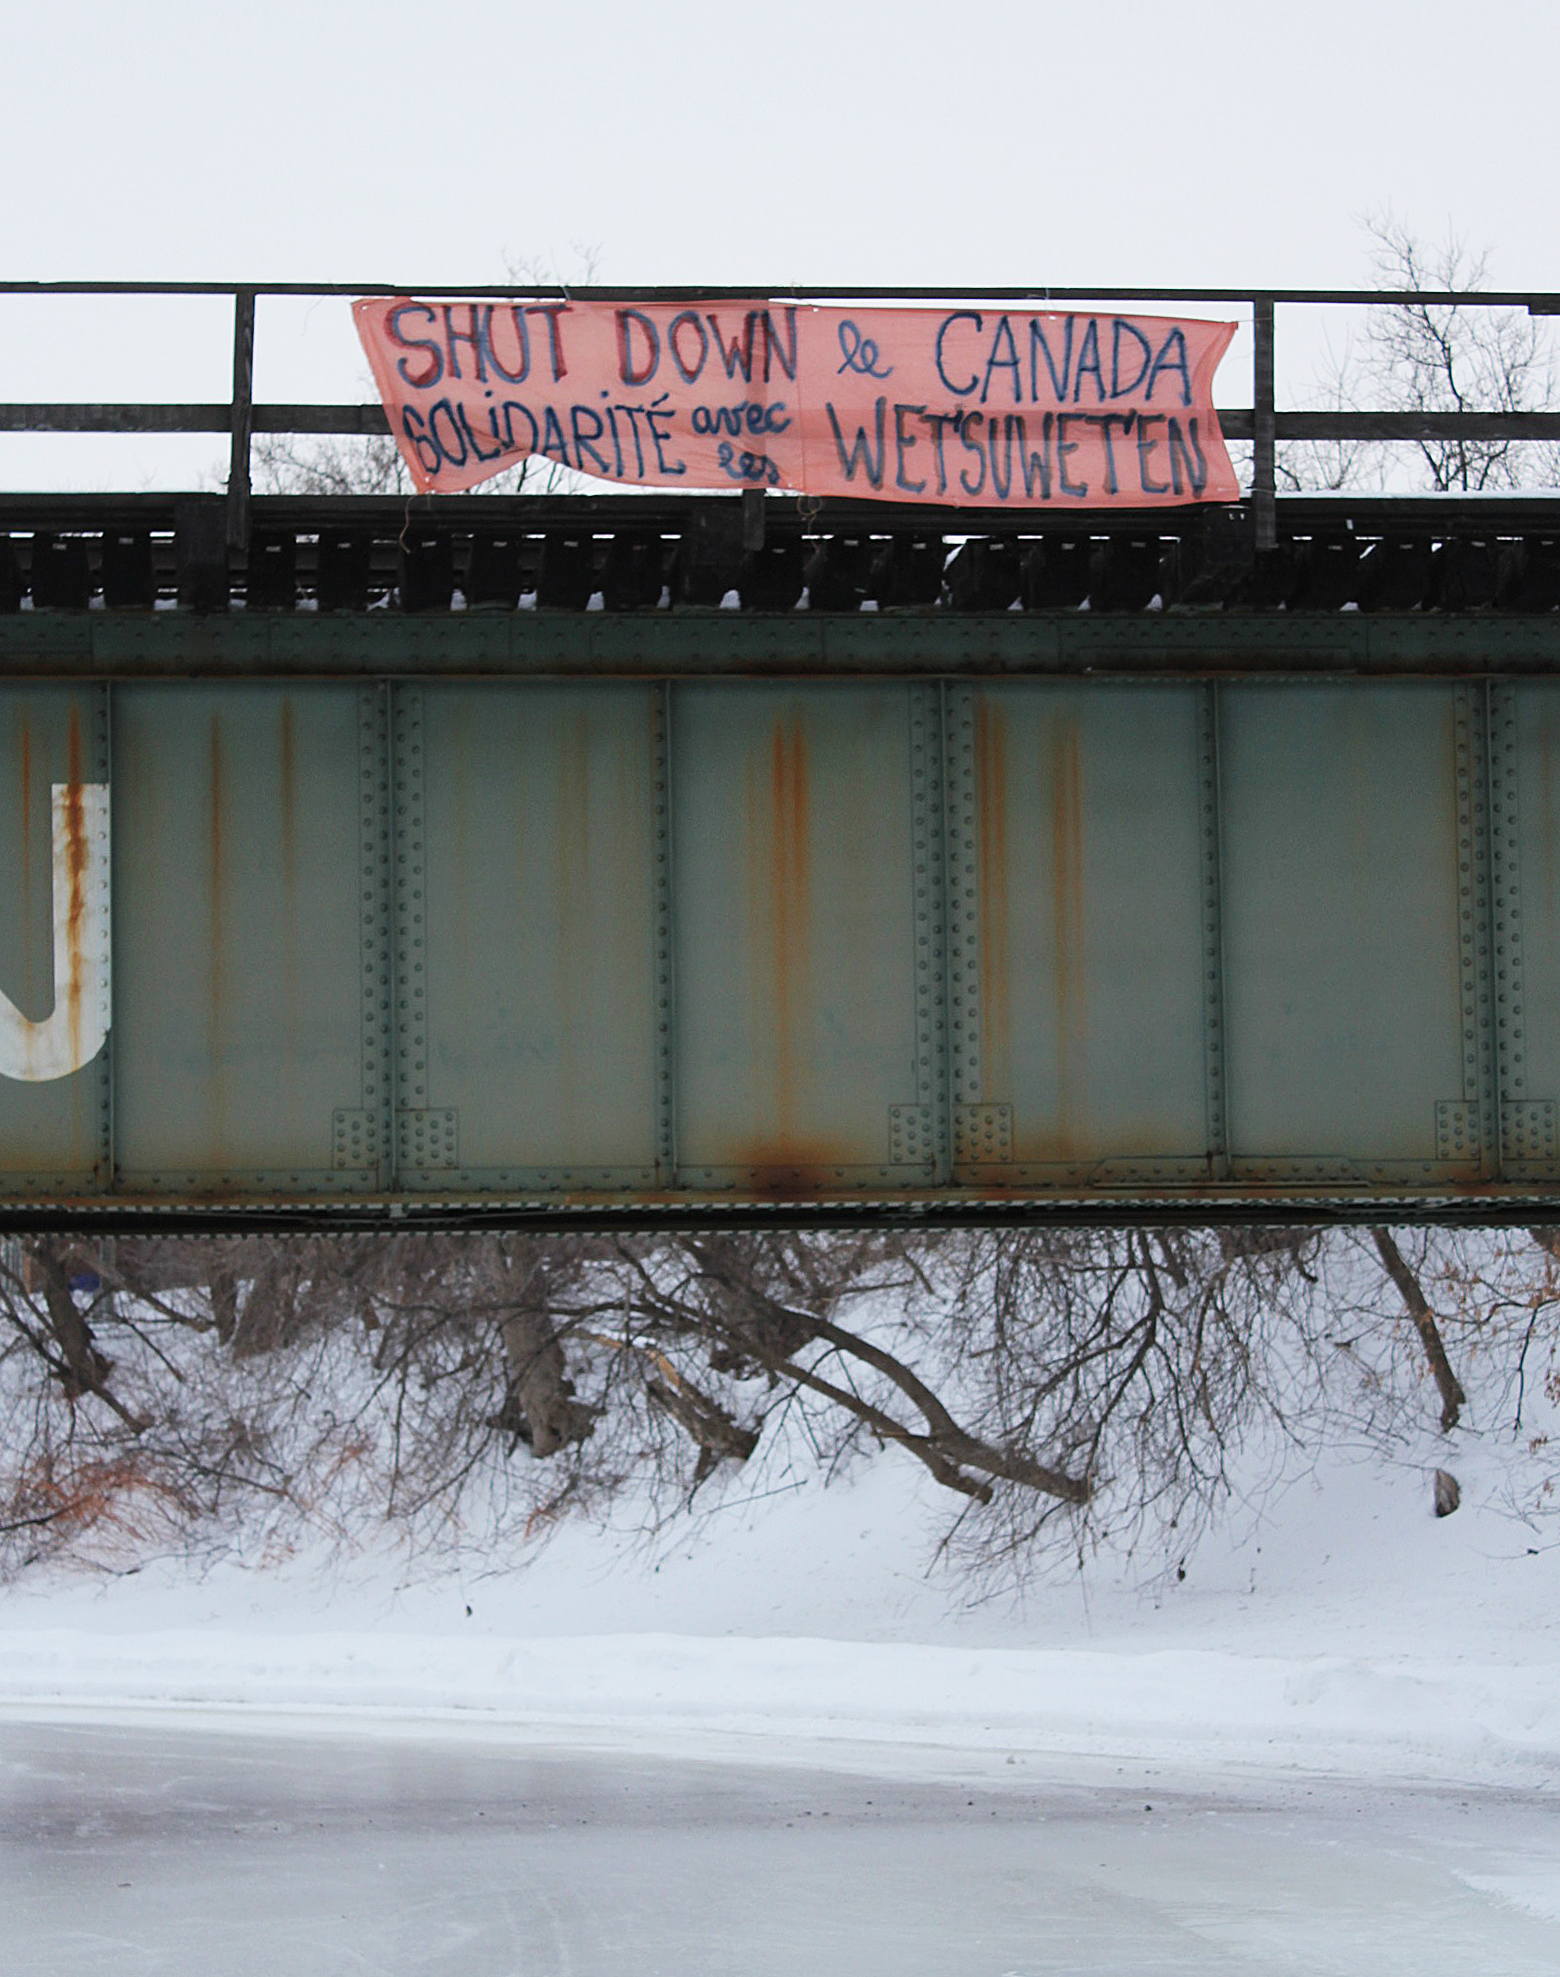 A Banner in Solidarity with the Wet'suwet'en People